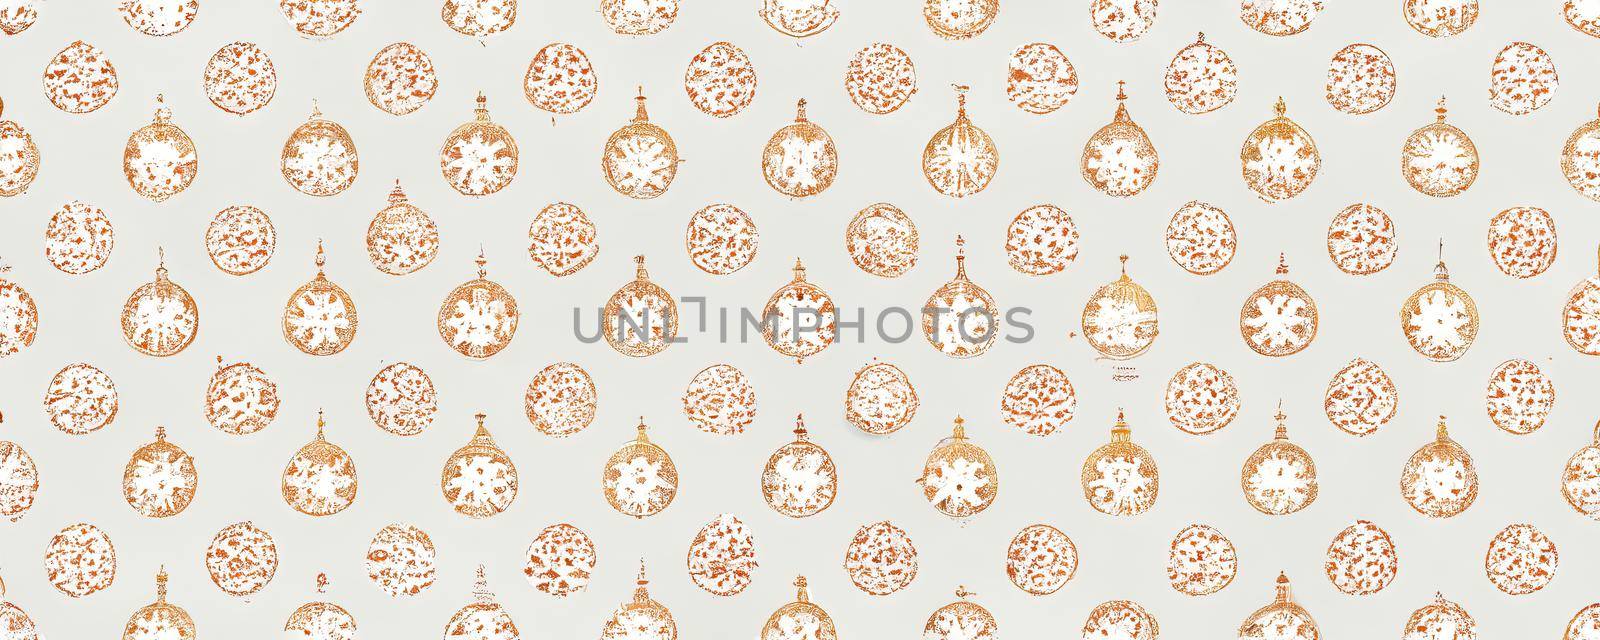 repeating pattern on the New Year theme in the form of snowflakes.